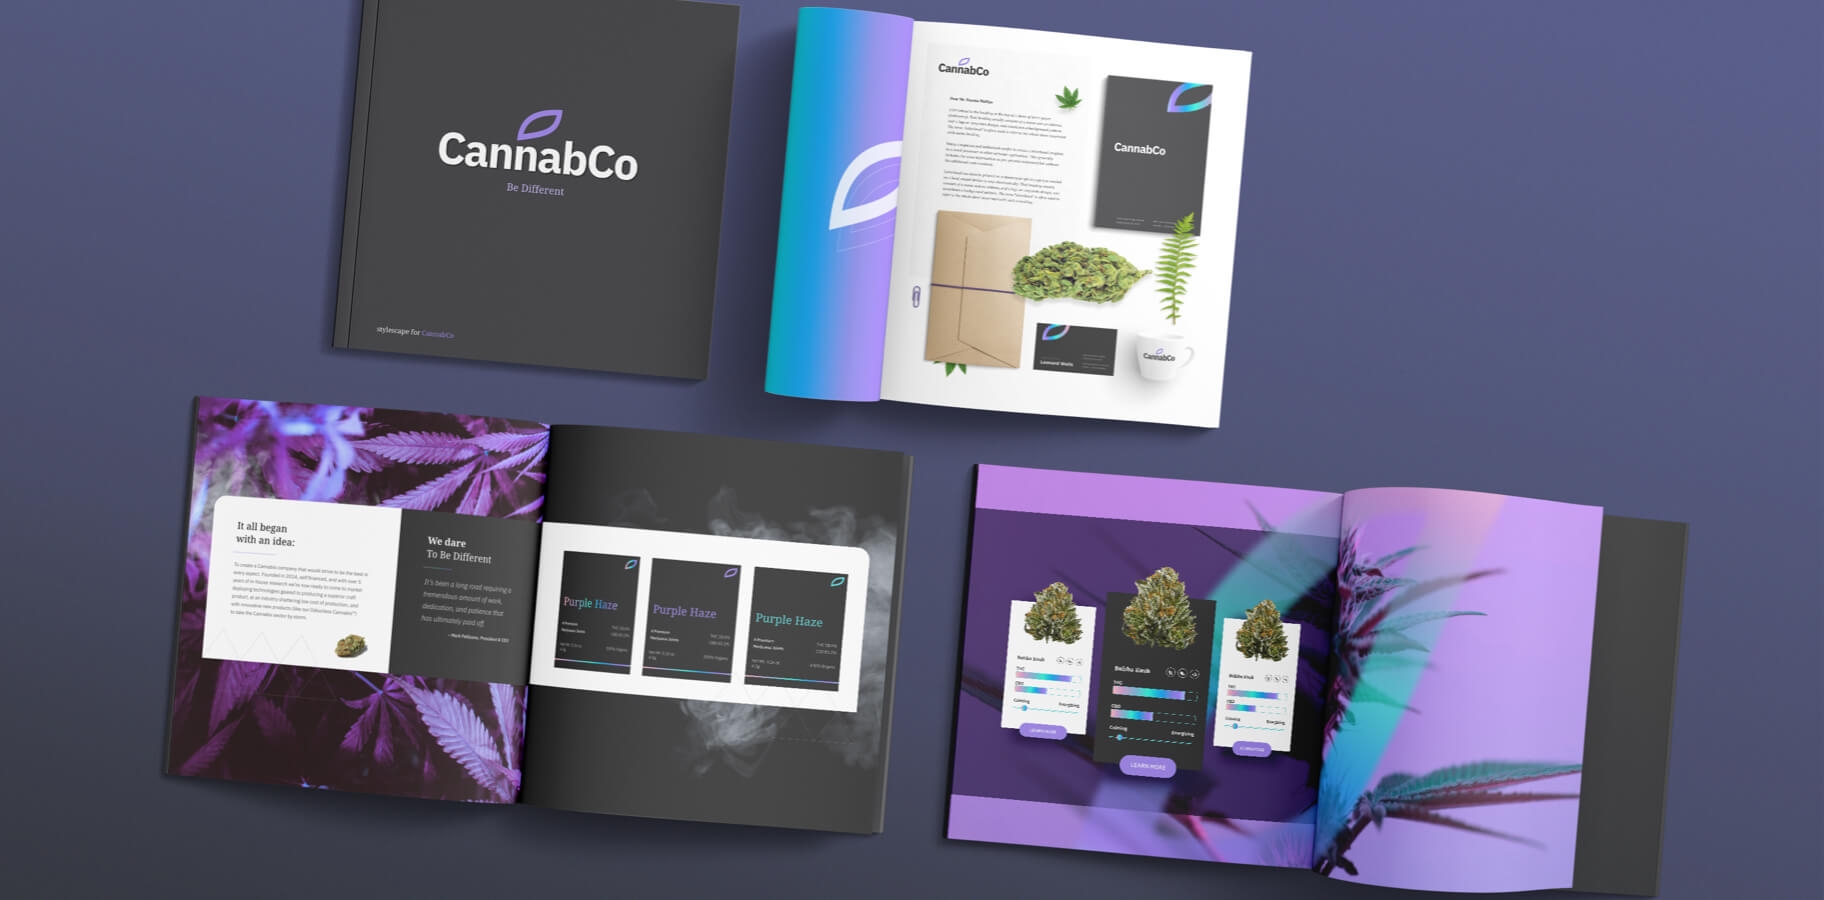 Promotional collateral that Elite Digital created for CannabCo